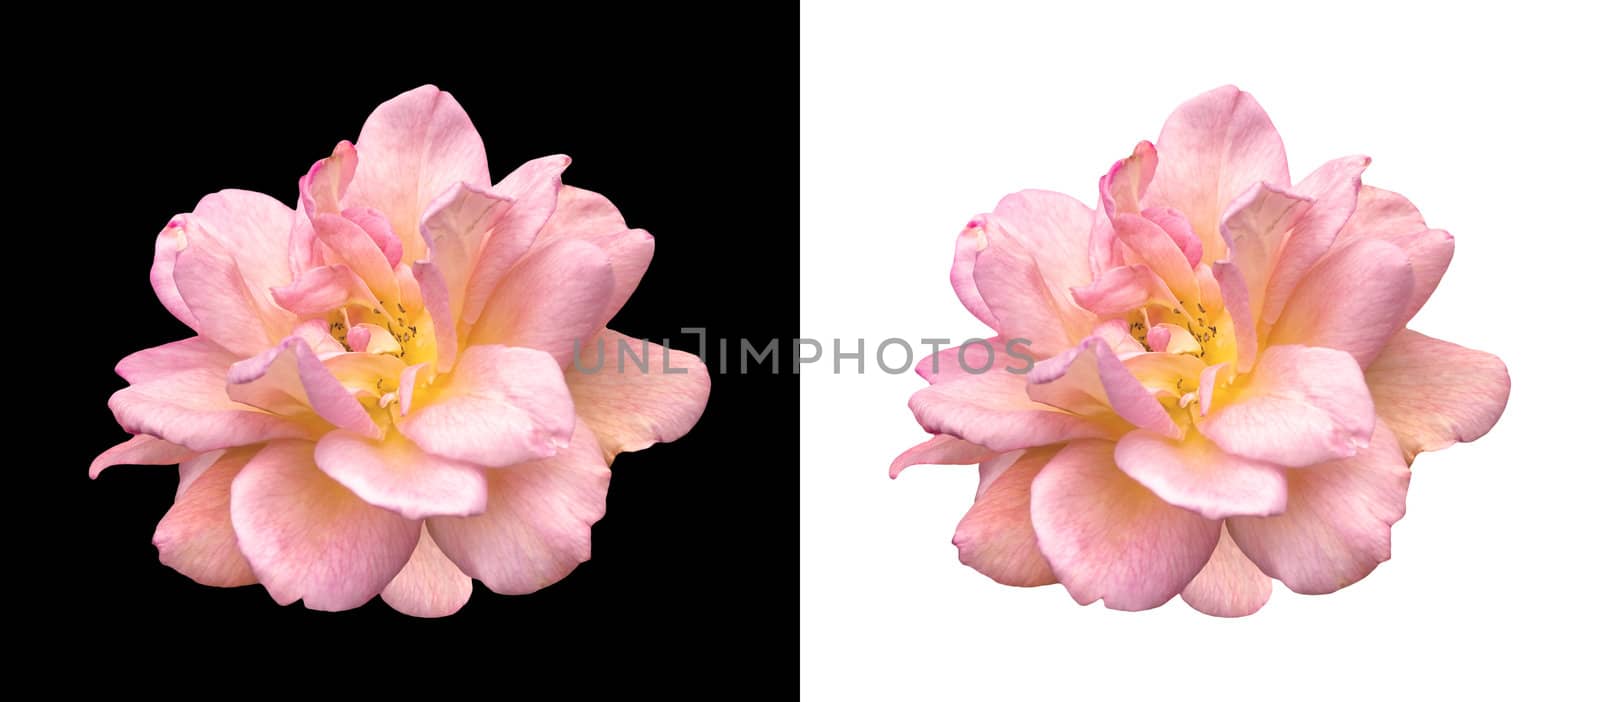 pink rose over black and white isolated by sherj